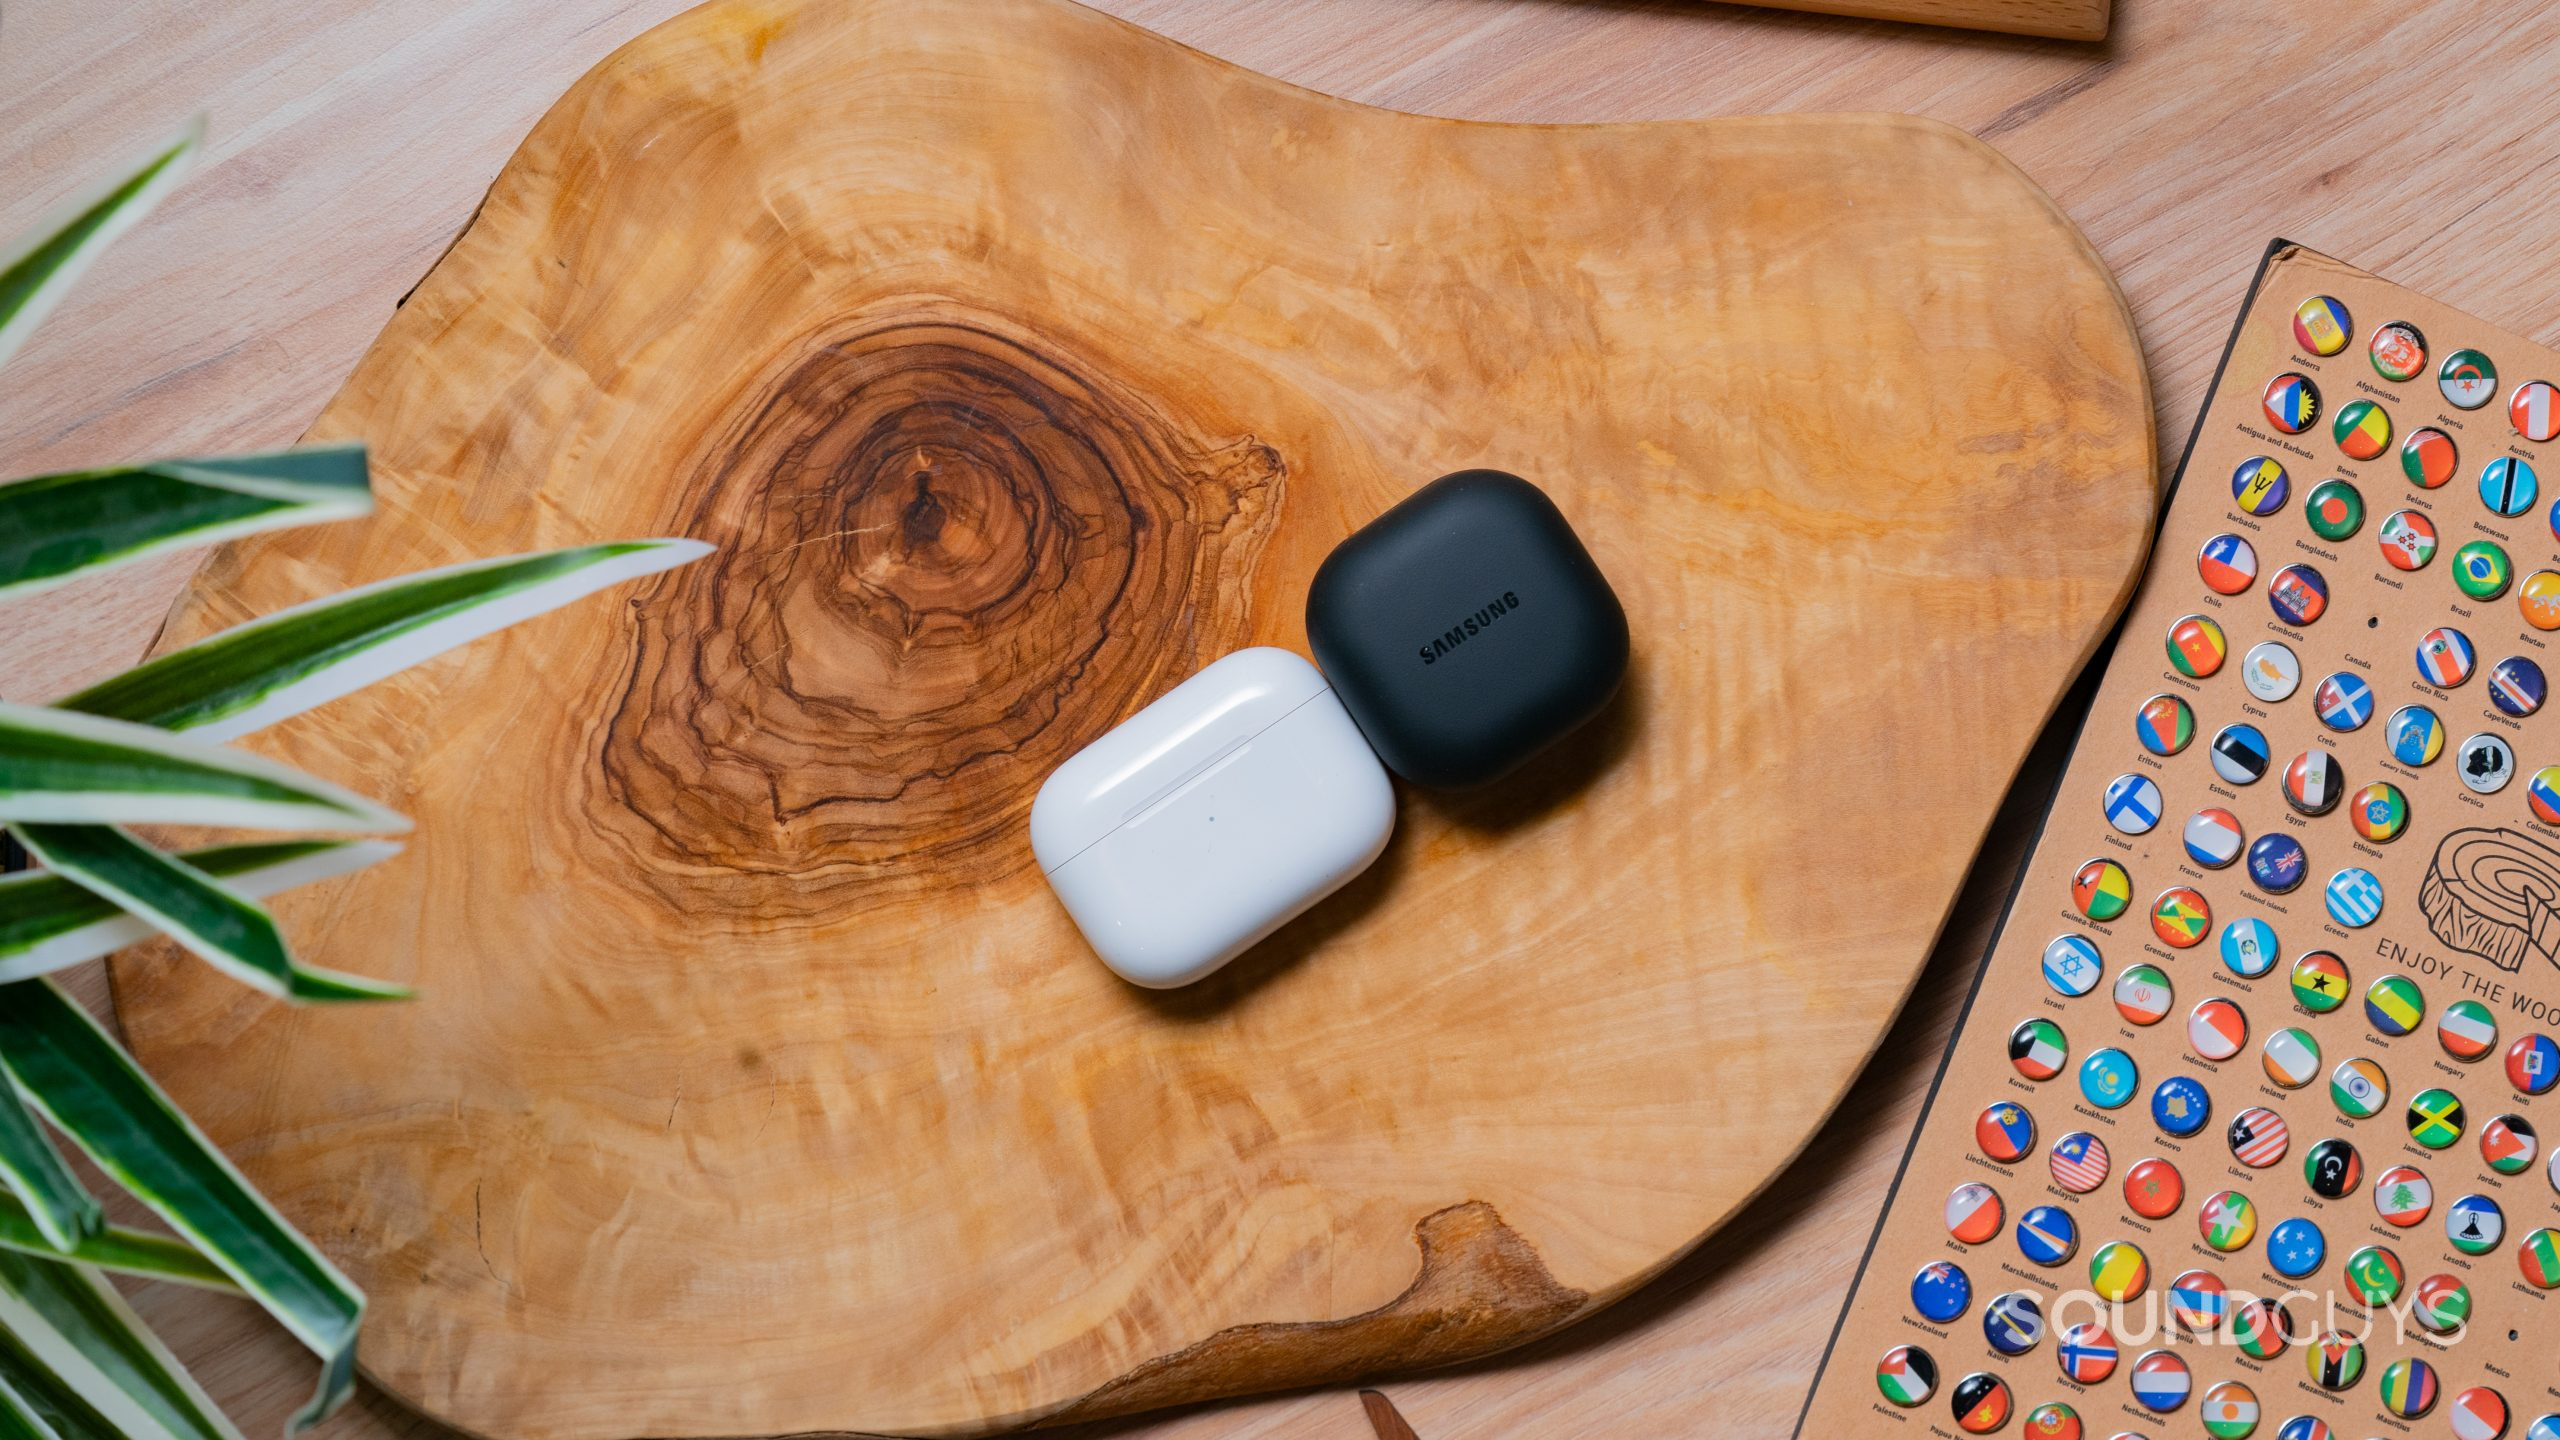 On a burled wood surface the Apple AirPods Pro (2nd generation) case rests on its back next to the Samsung Galaxy Buds 2 Pro charging case.